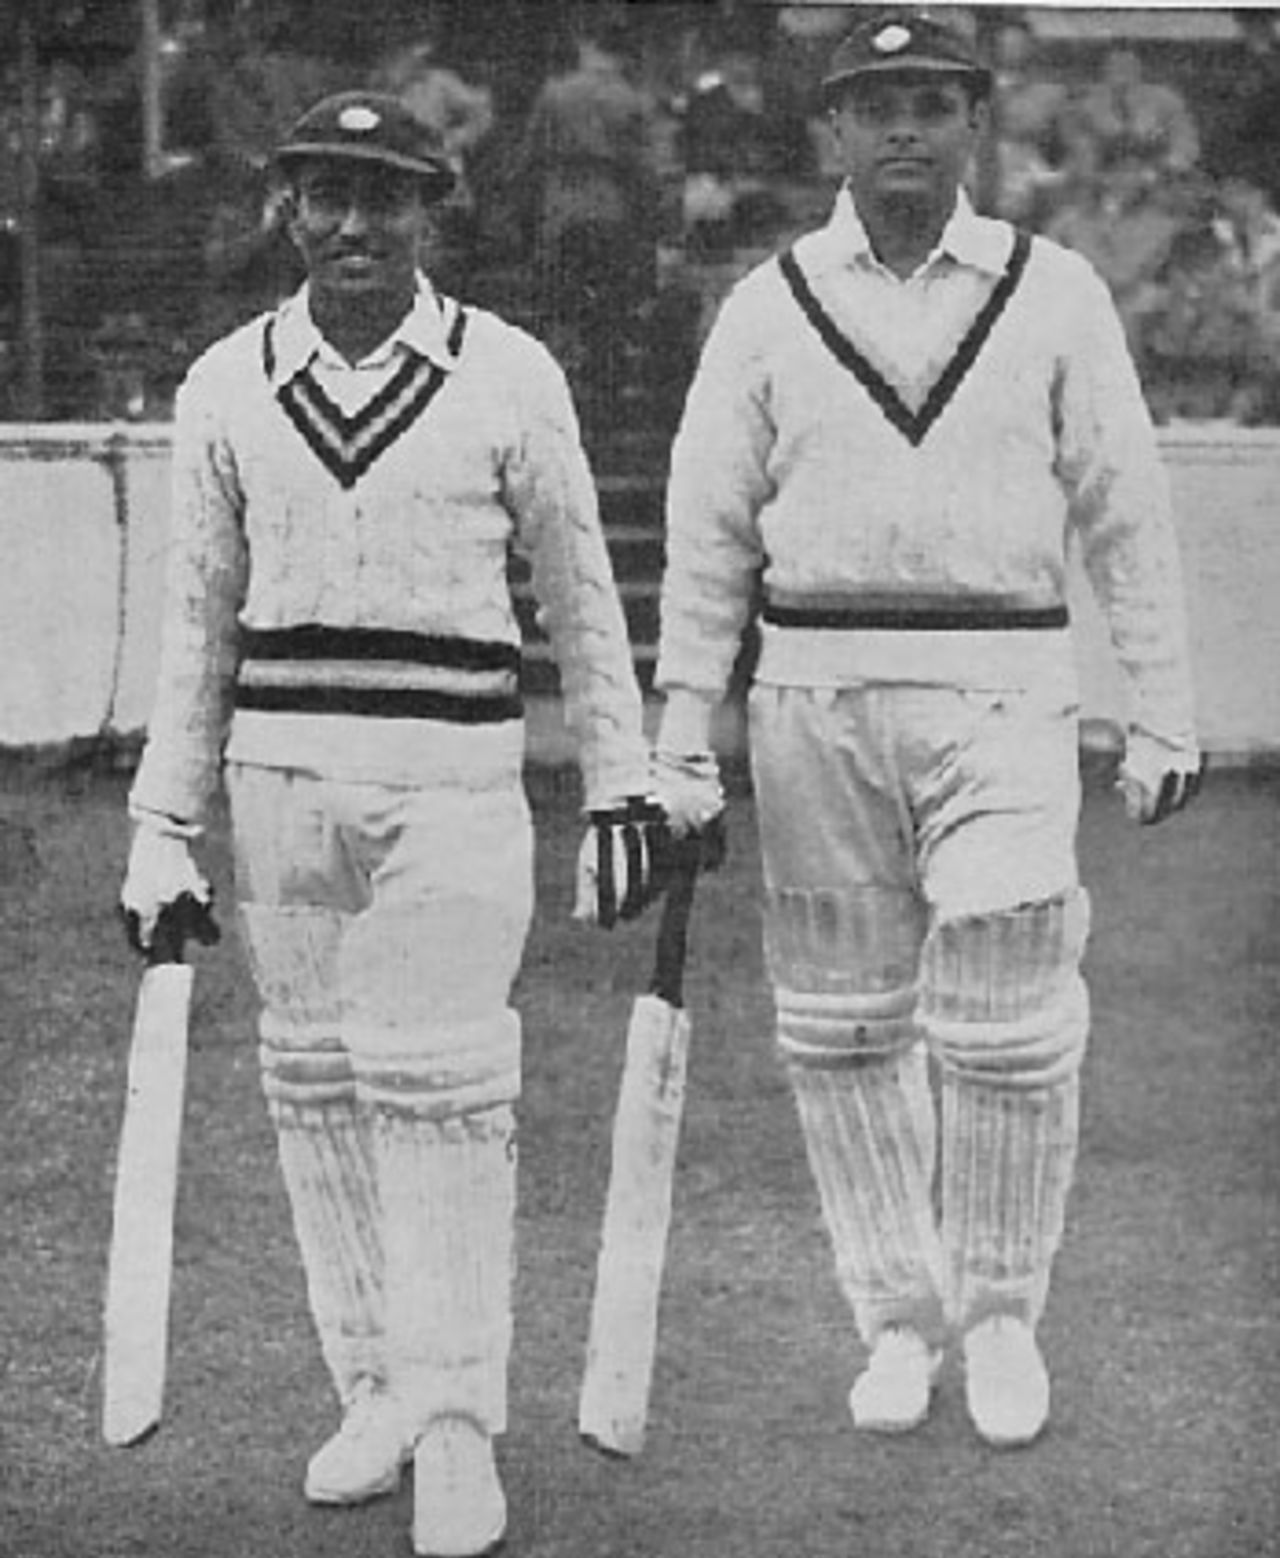 C. T. Sarwate and S. Banerjee, who created records by scoring 249 for the last wicket for India against Surrey at Kennington Oval. The stand was the highest ever recorded for the last wicket in England, and never before had Nos. 10 and 11 batsmen each scored a century in the same innings